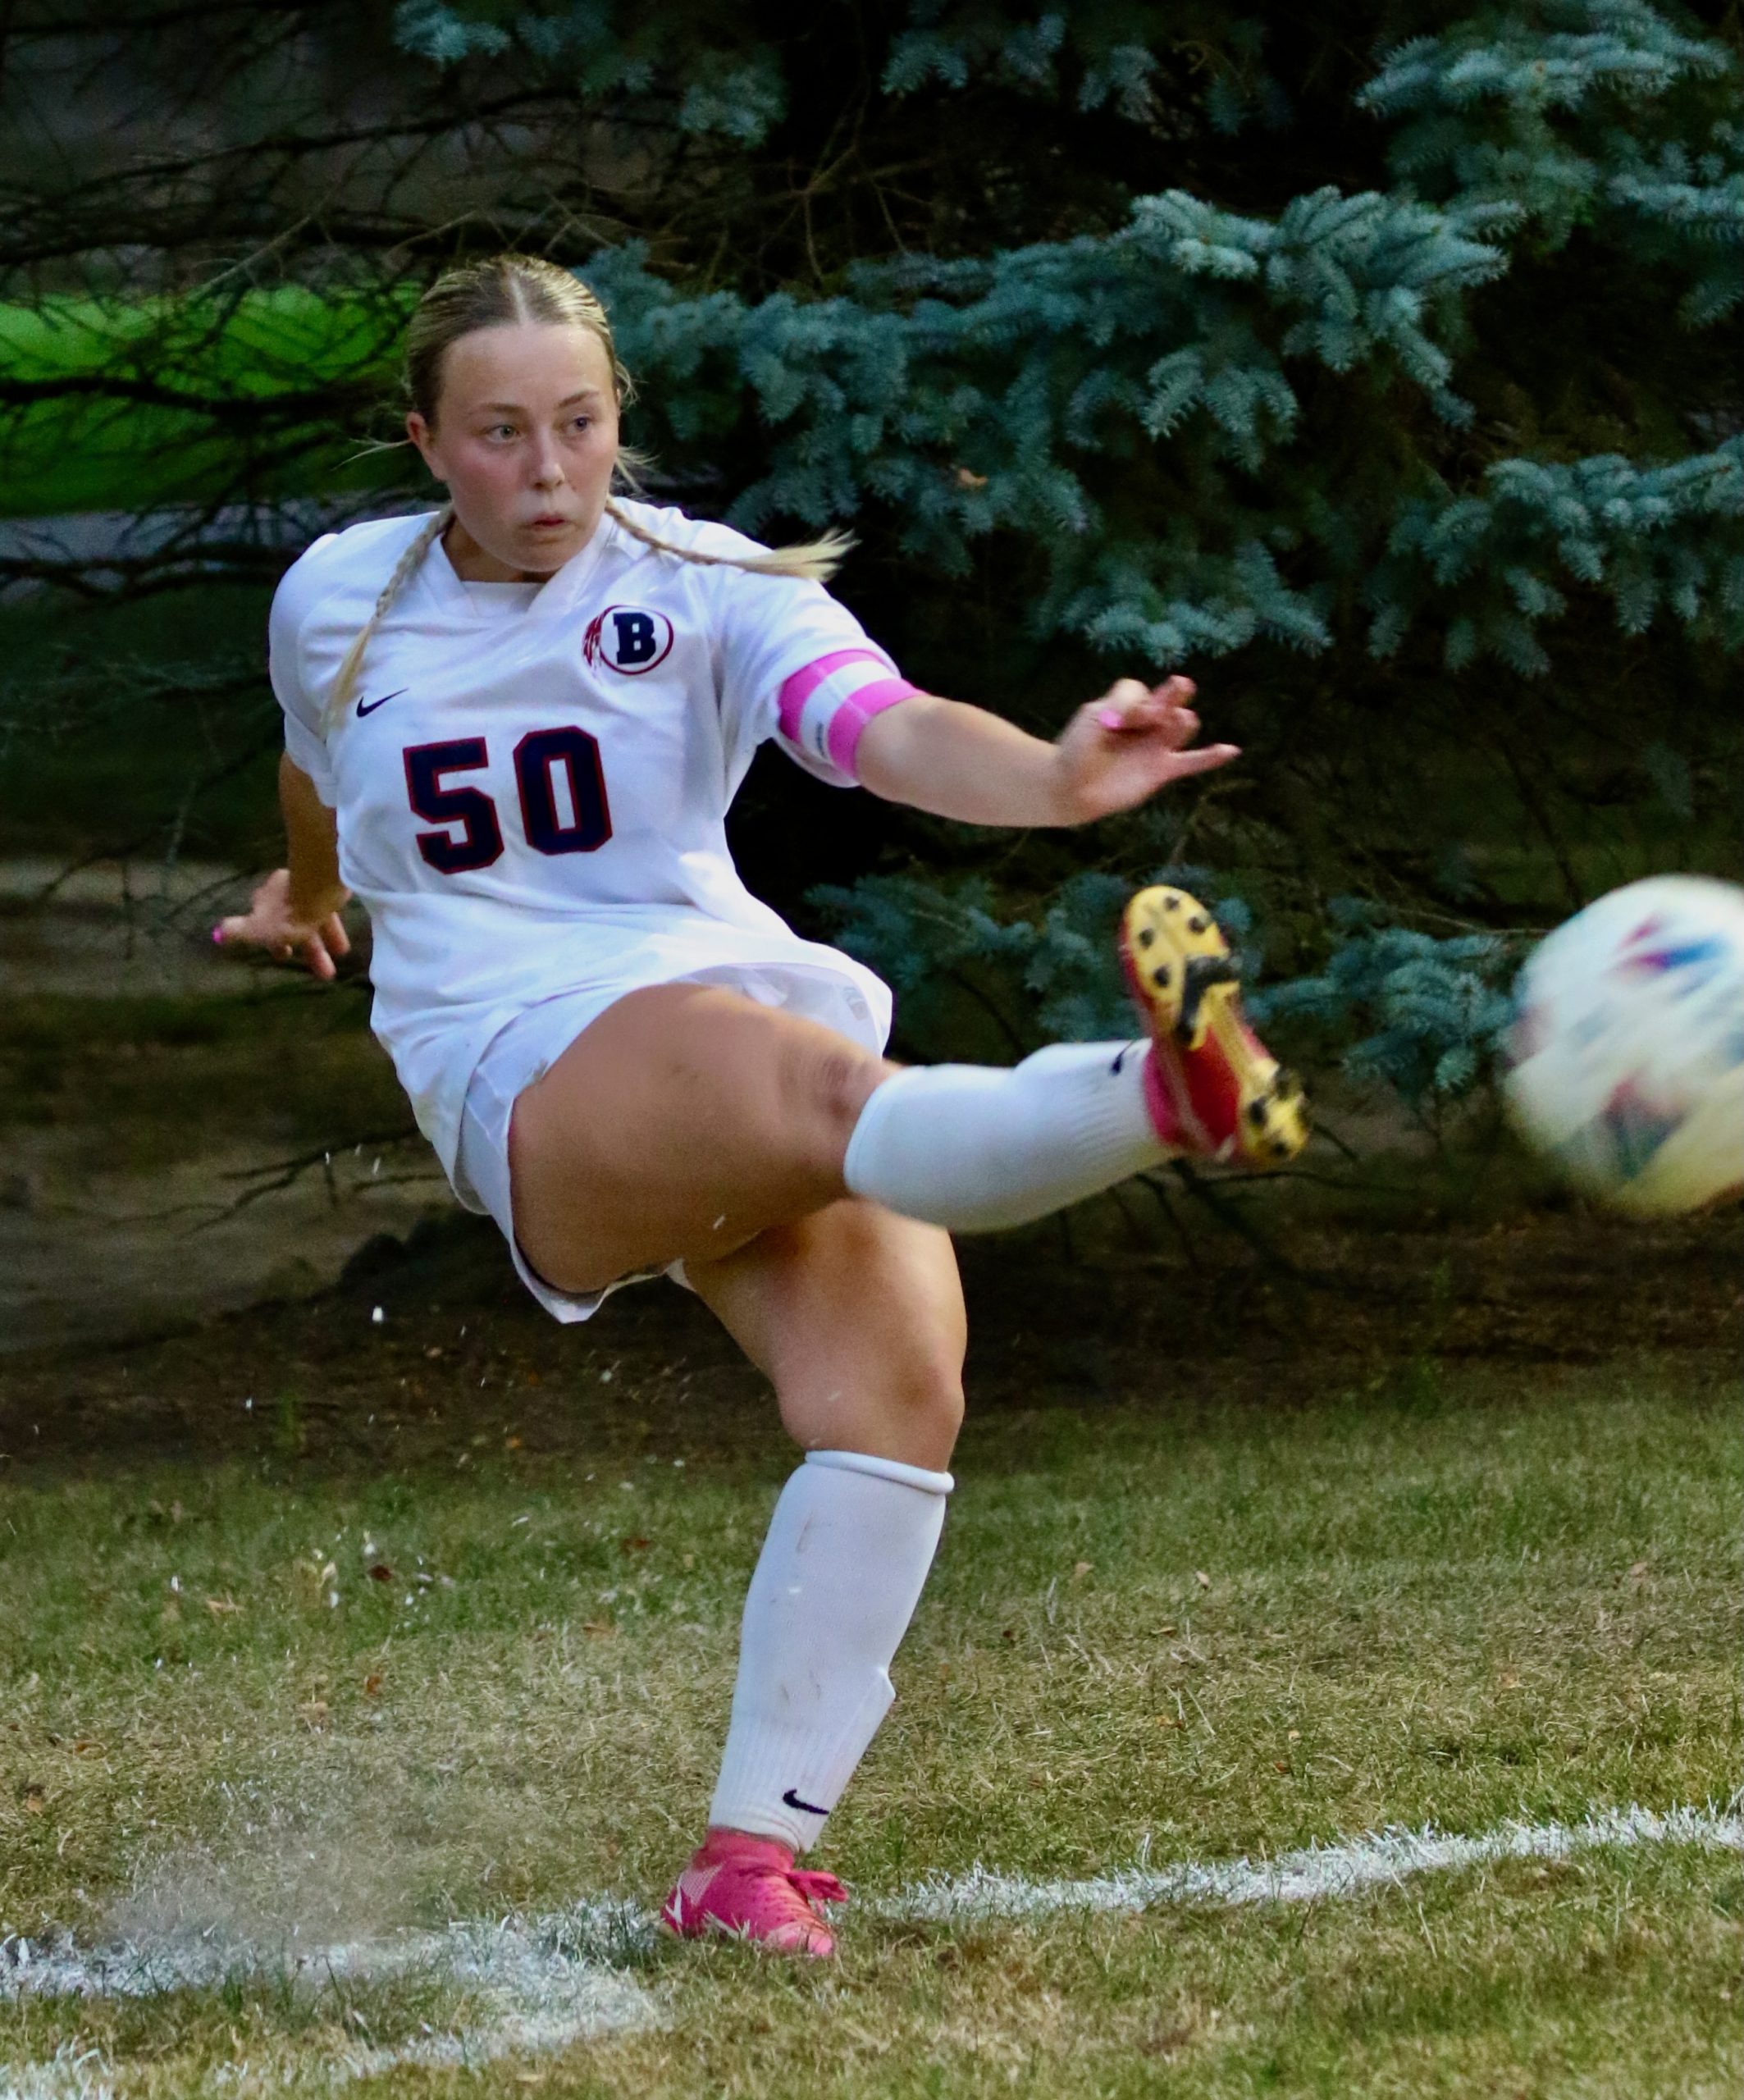 Record number of girls teams set for this year's IHSAA soccer